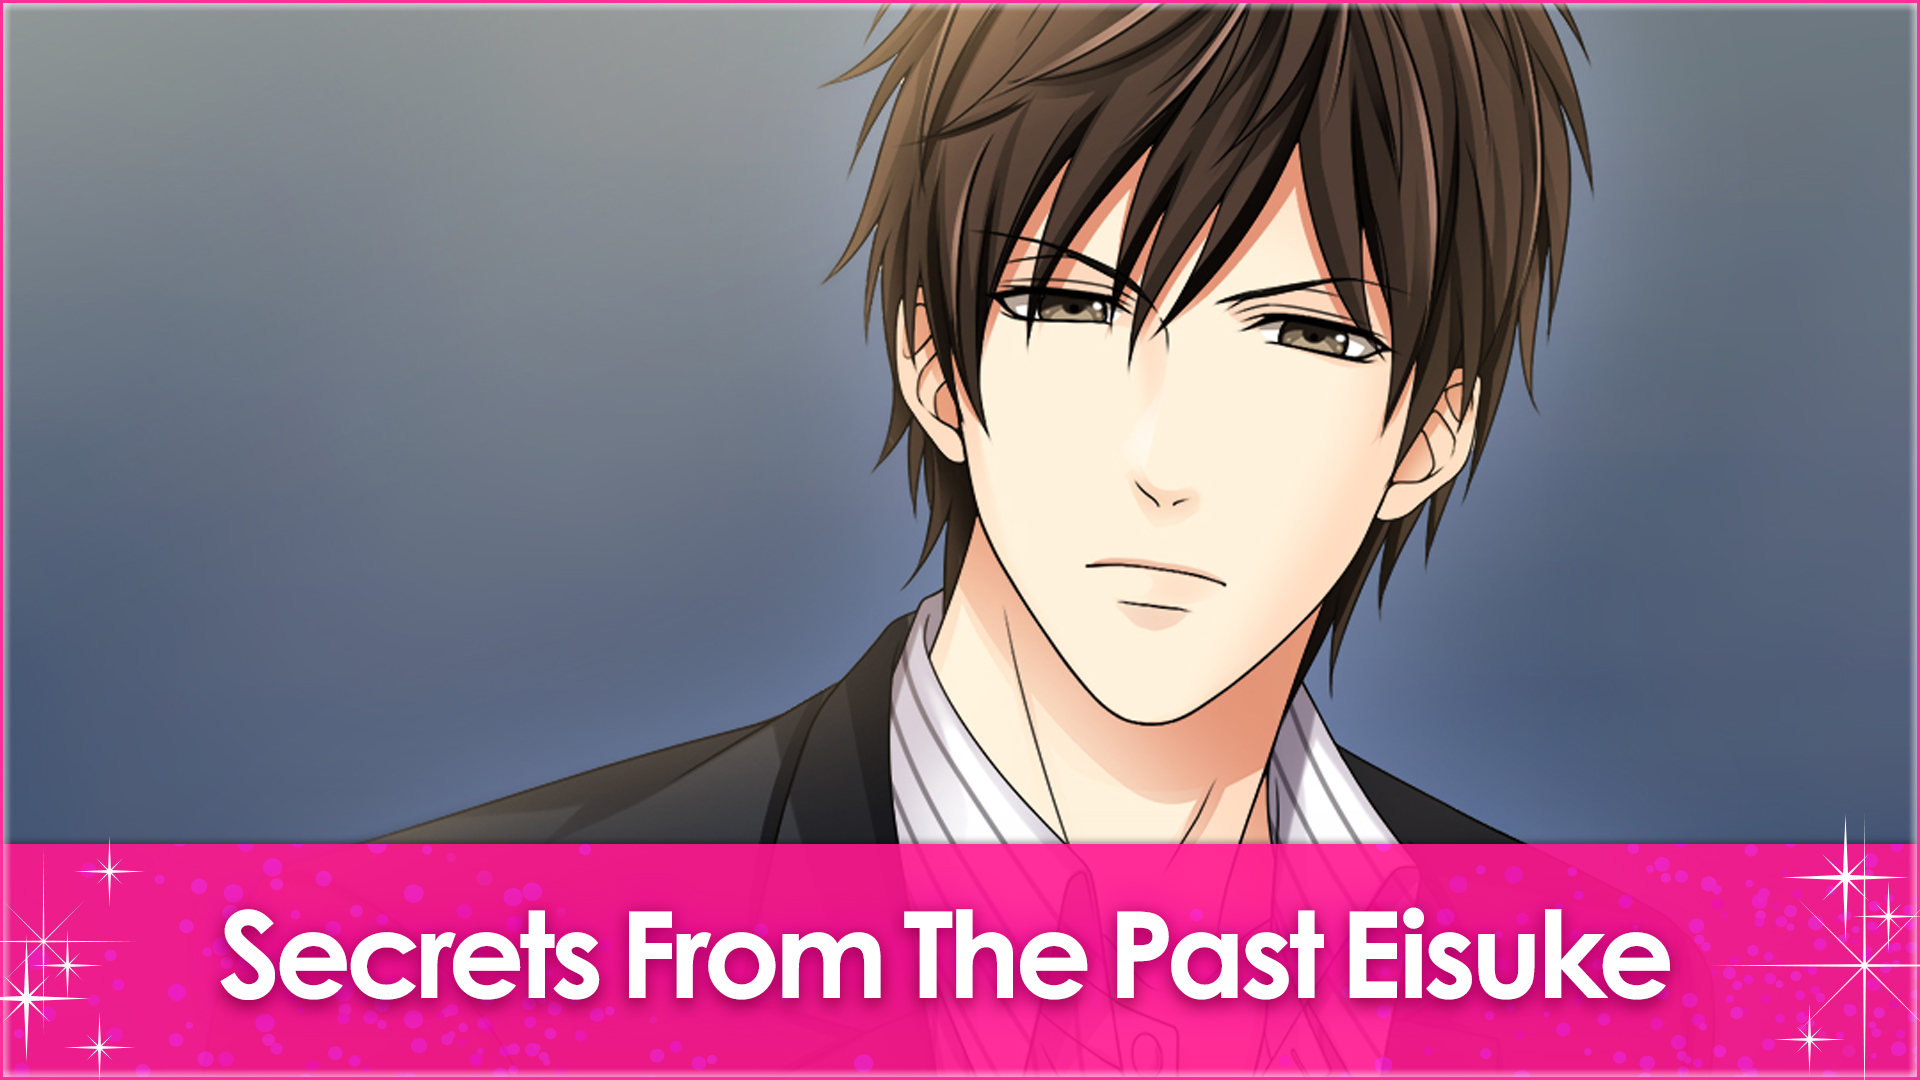 Secrets From The Past Eisuke